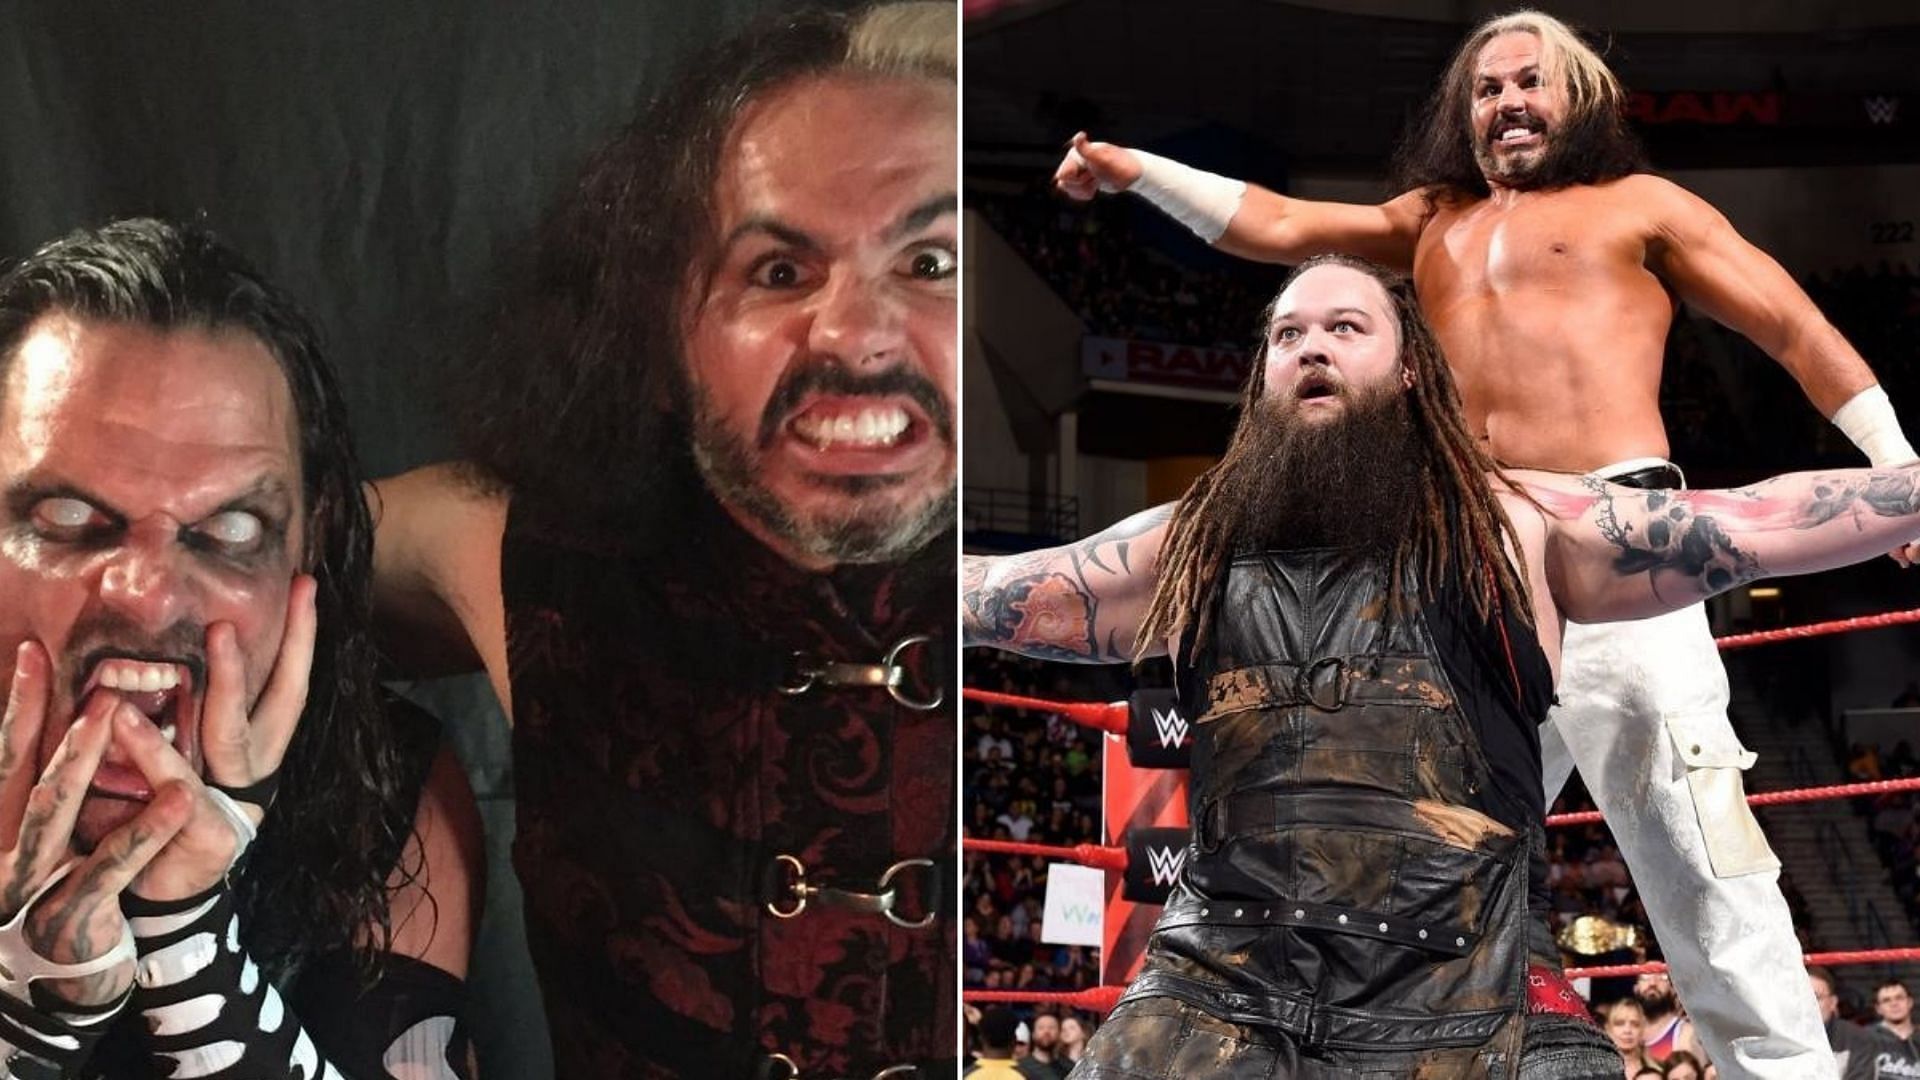 Matt Hardy has unleashed his &quot;Broken Brilliance&quot; in WWE, TNA, and ROH